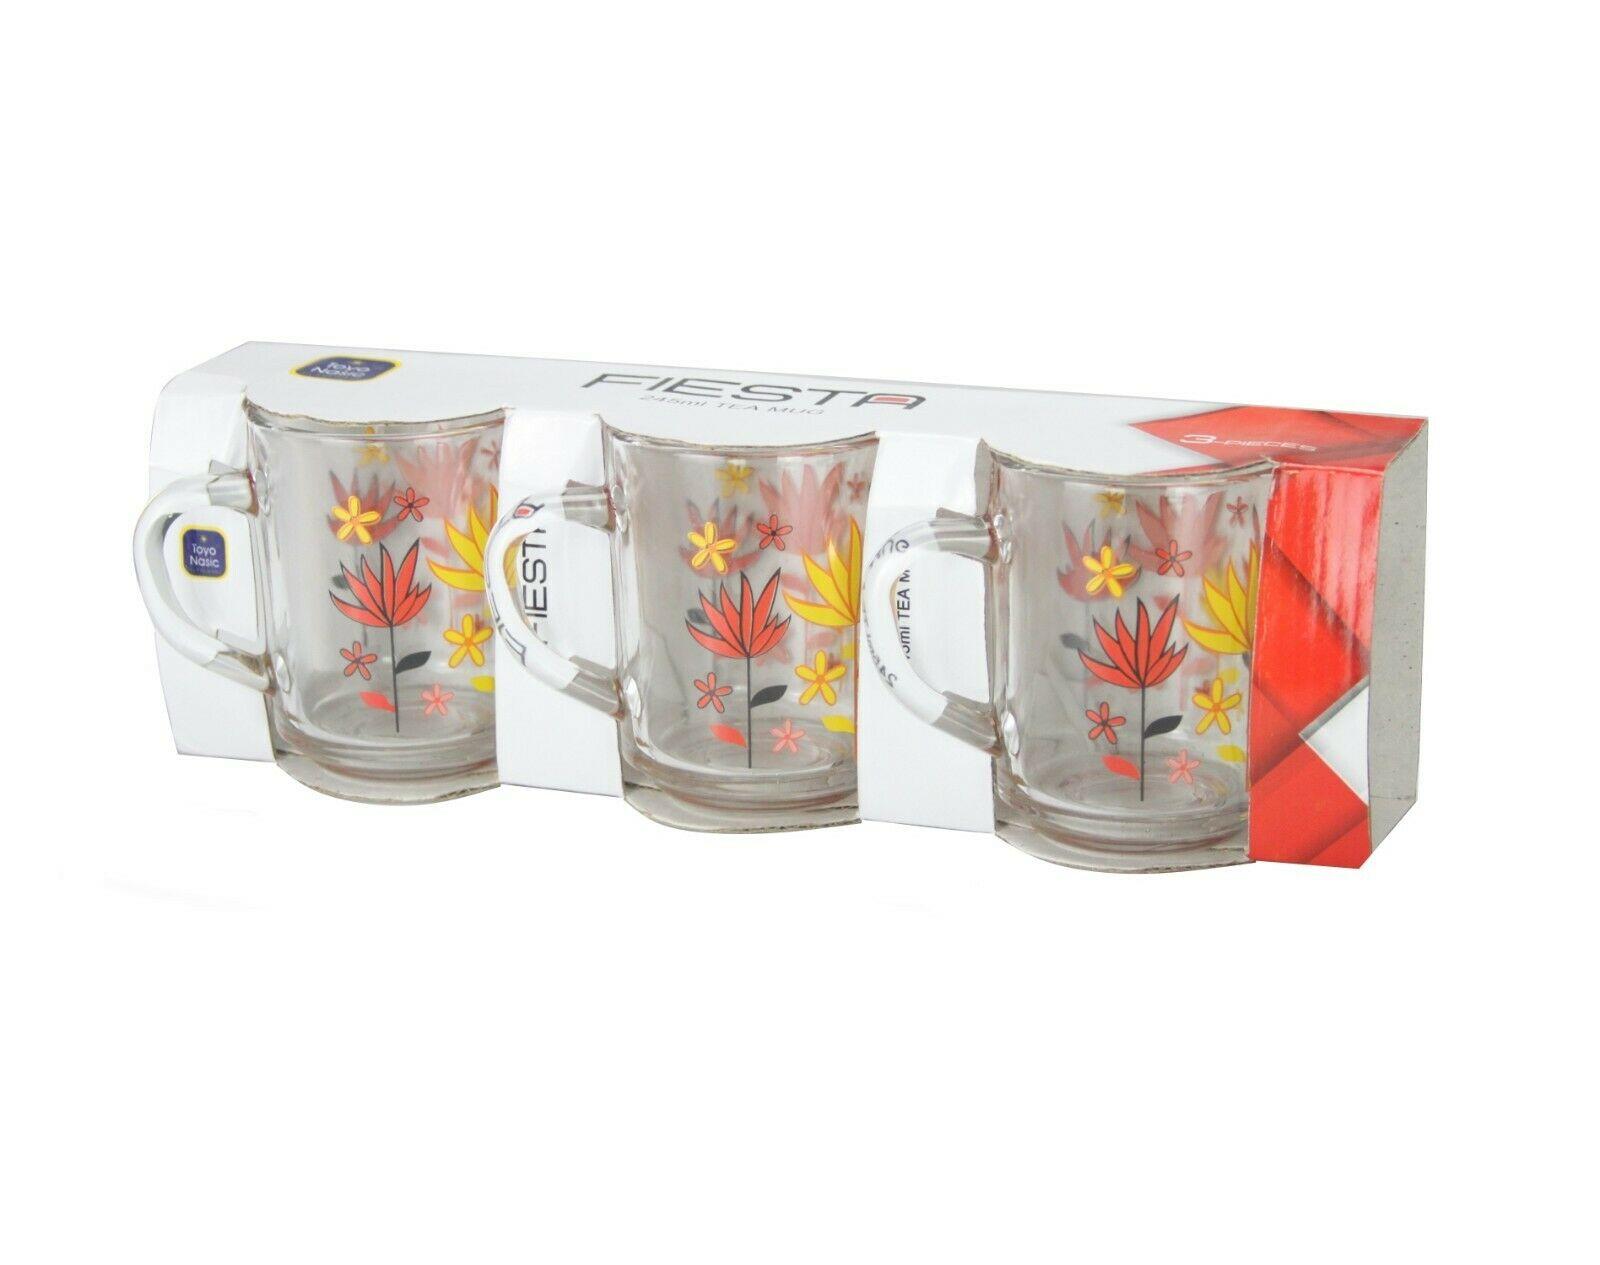 Urbnliving 4pcs 300ml Insulated Thick Transparent Glass Thermal Coffee Tea Mug Cup Set